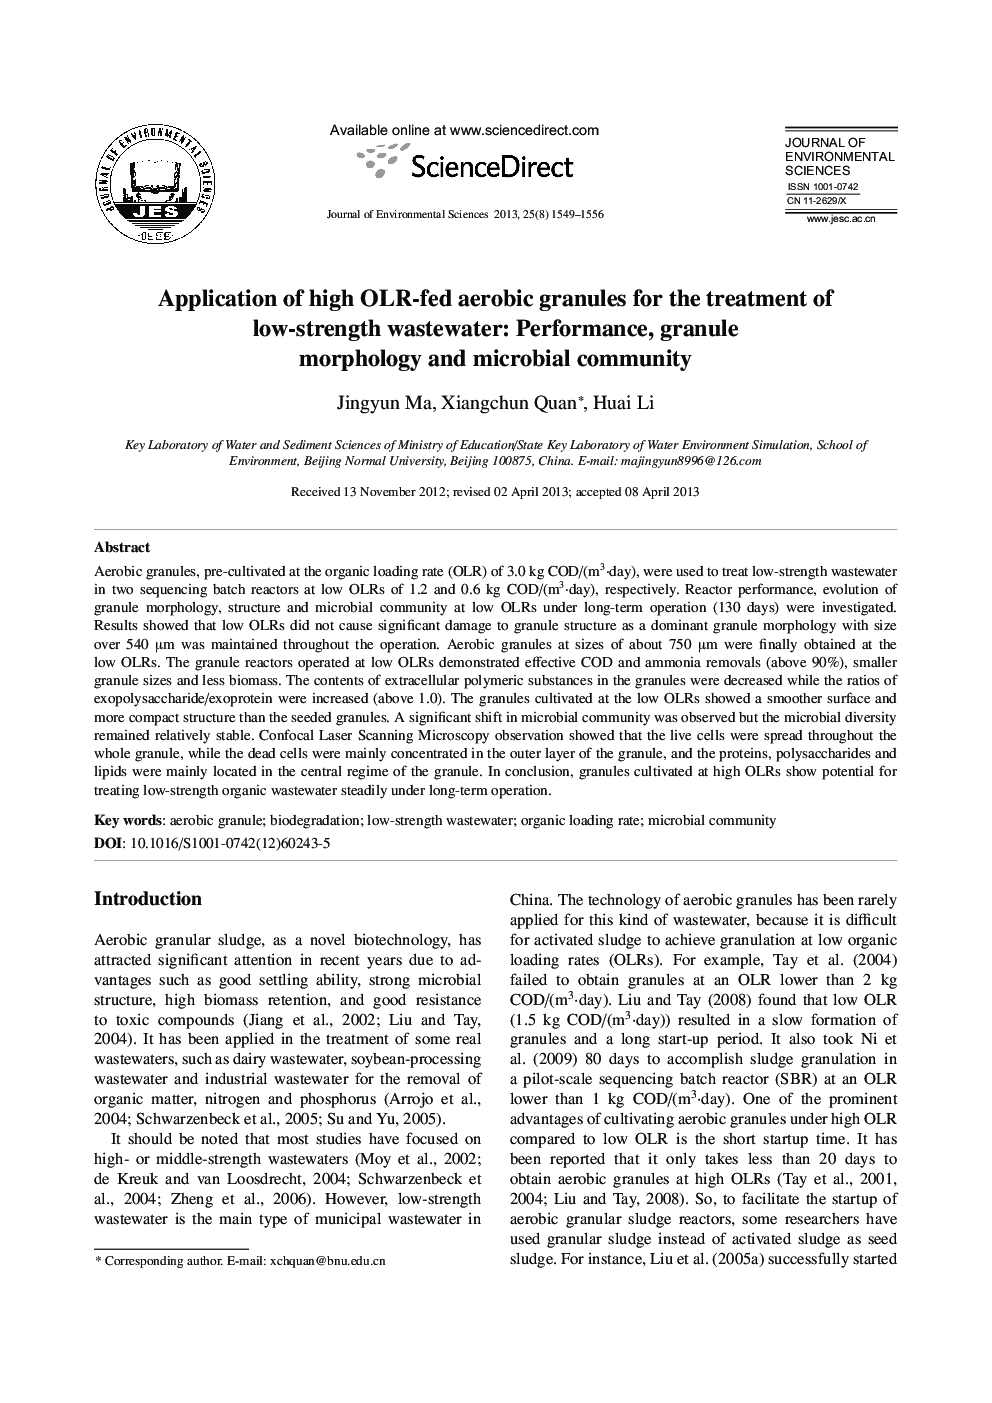 Application of high OLR-fed aerobic granules for the treatment of low-strength wastewater: Performance, granule morphology and microbial community